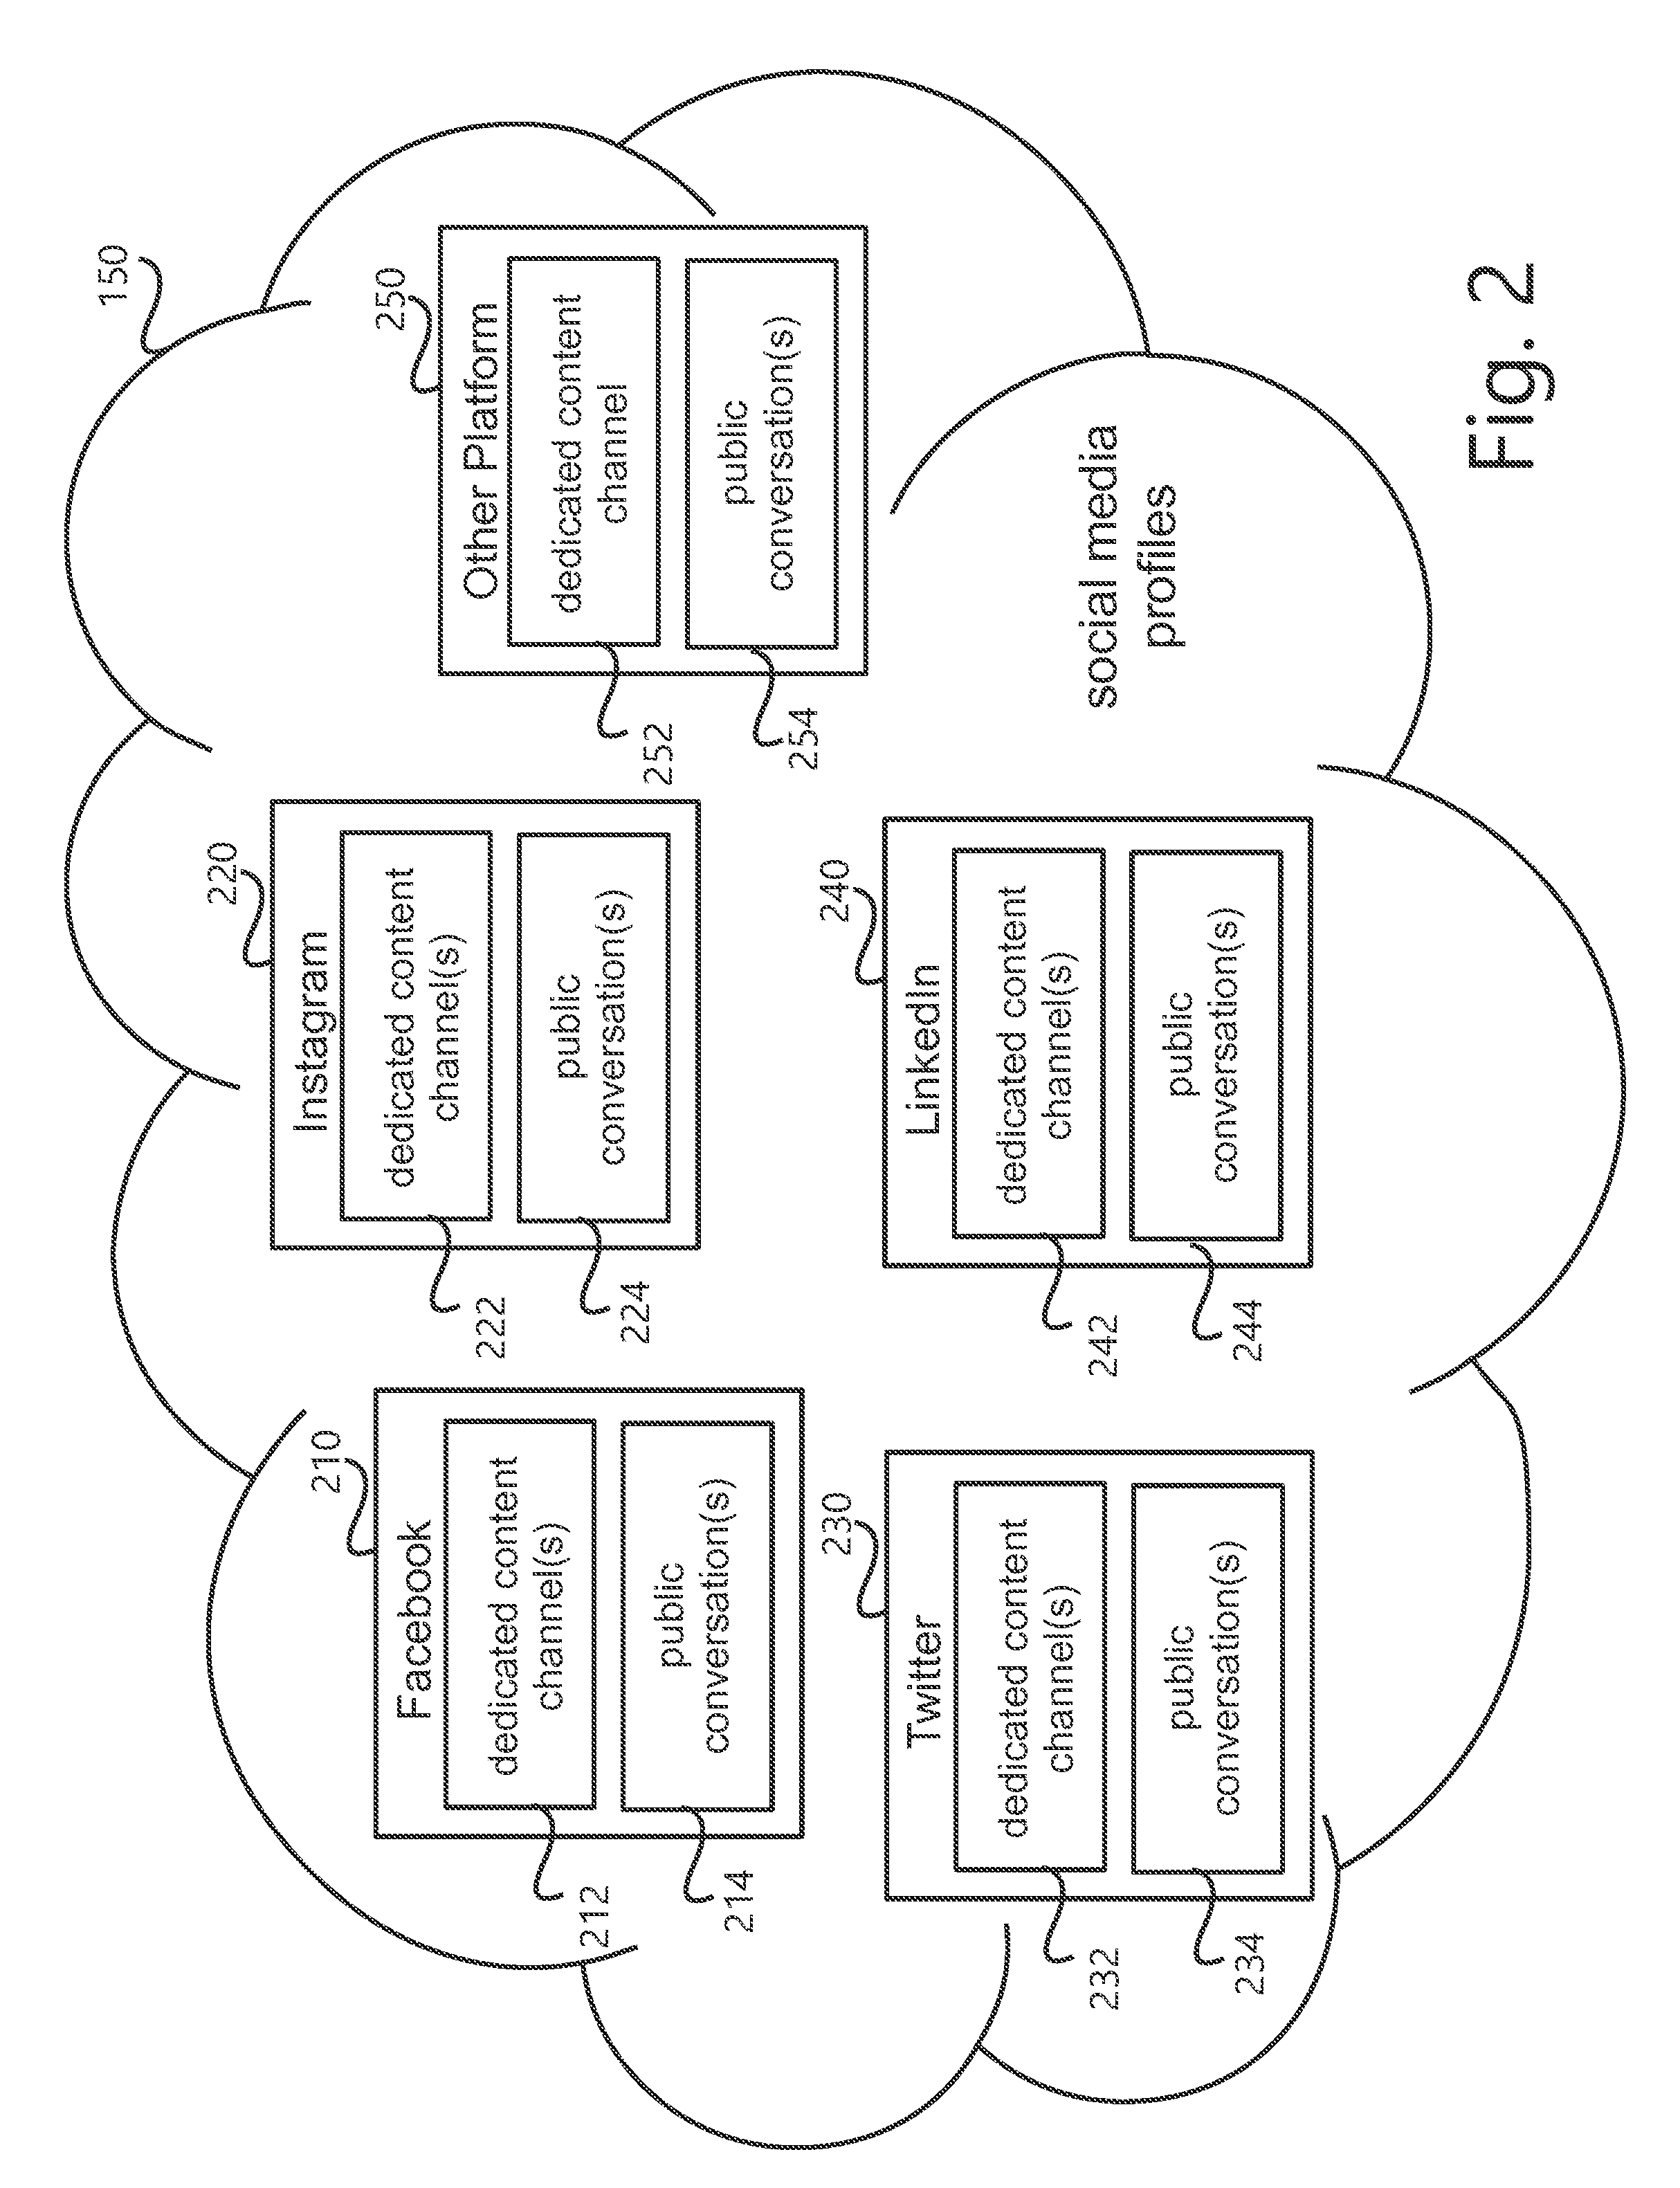 Systems and Methods for Simultaneous Display of Related Social Media Analysis Within a Time Frame